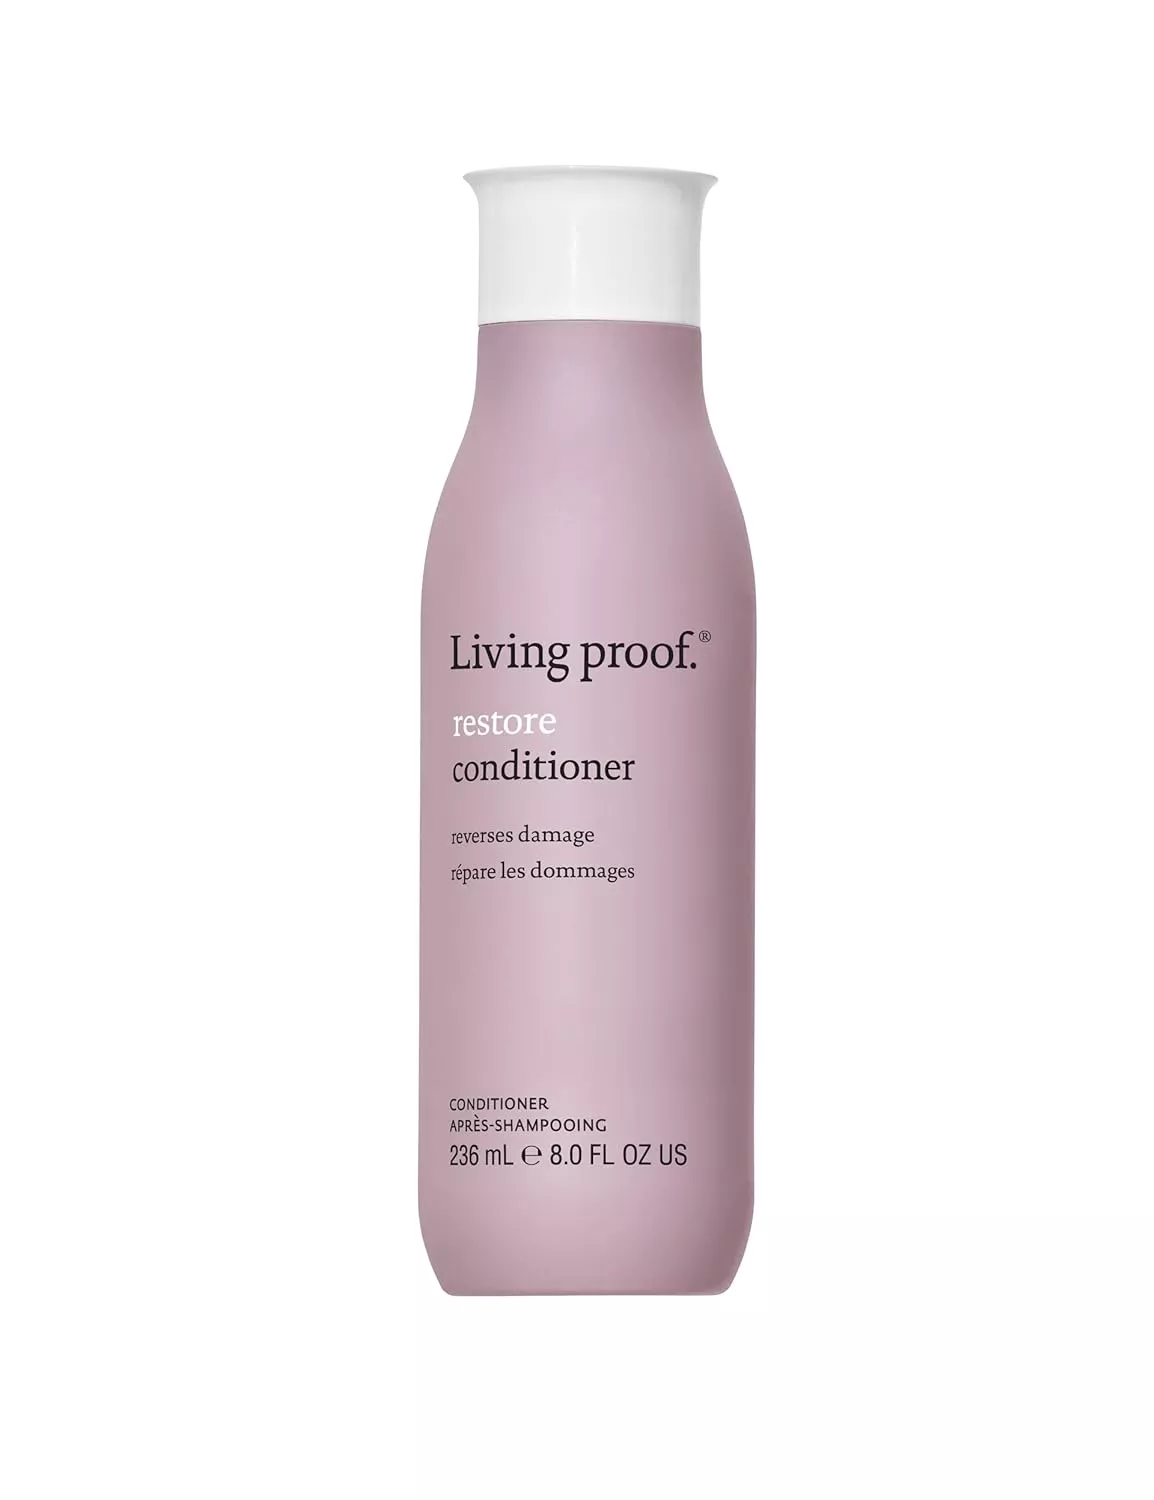 FemmeNordic's choice in the Living Proof Vs Monat comparison, the Restore Conditioner by Living Proof